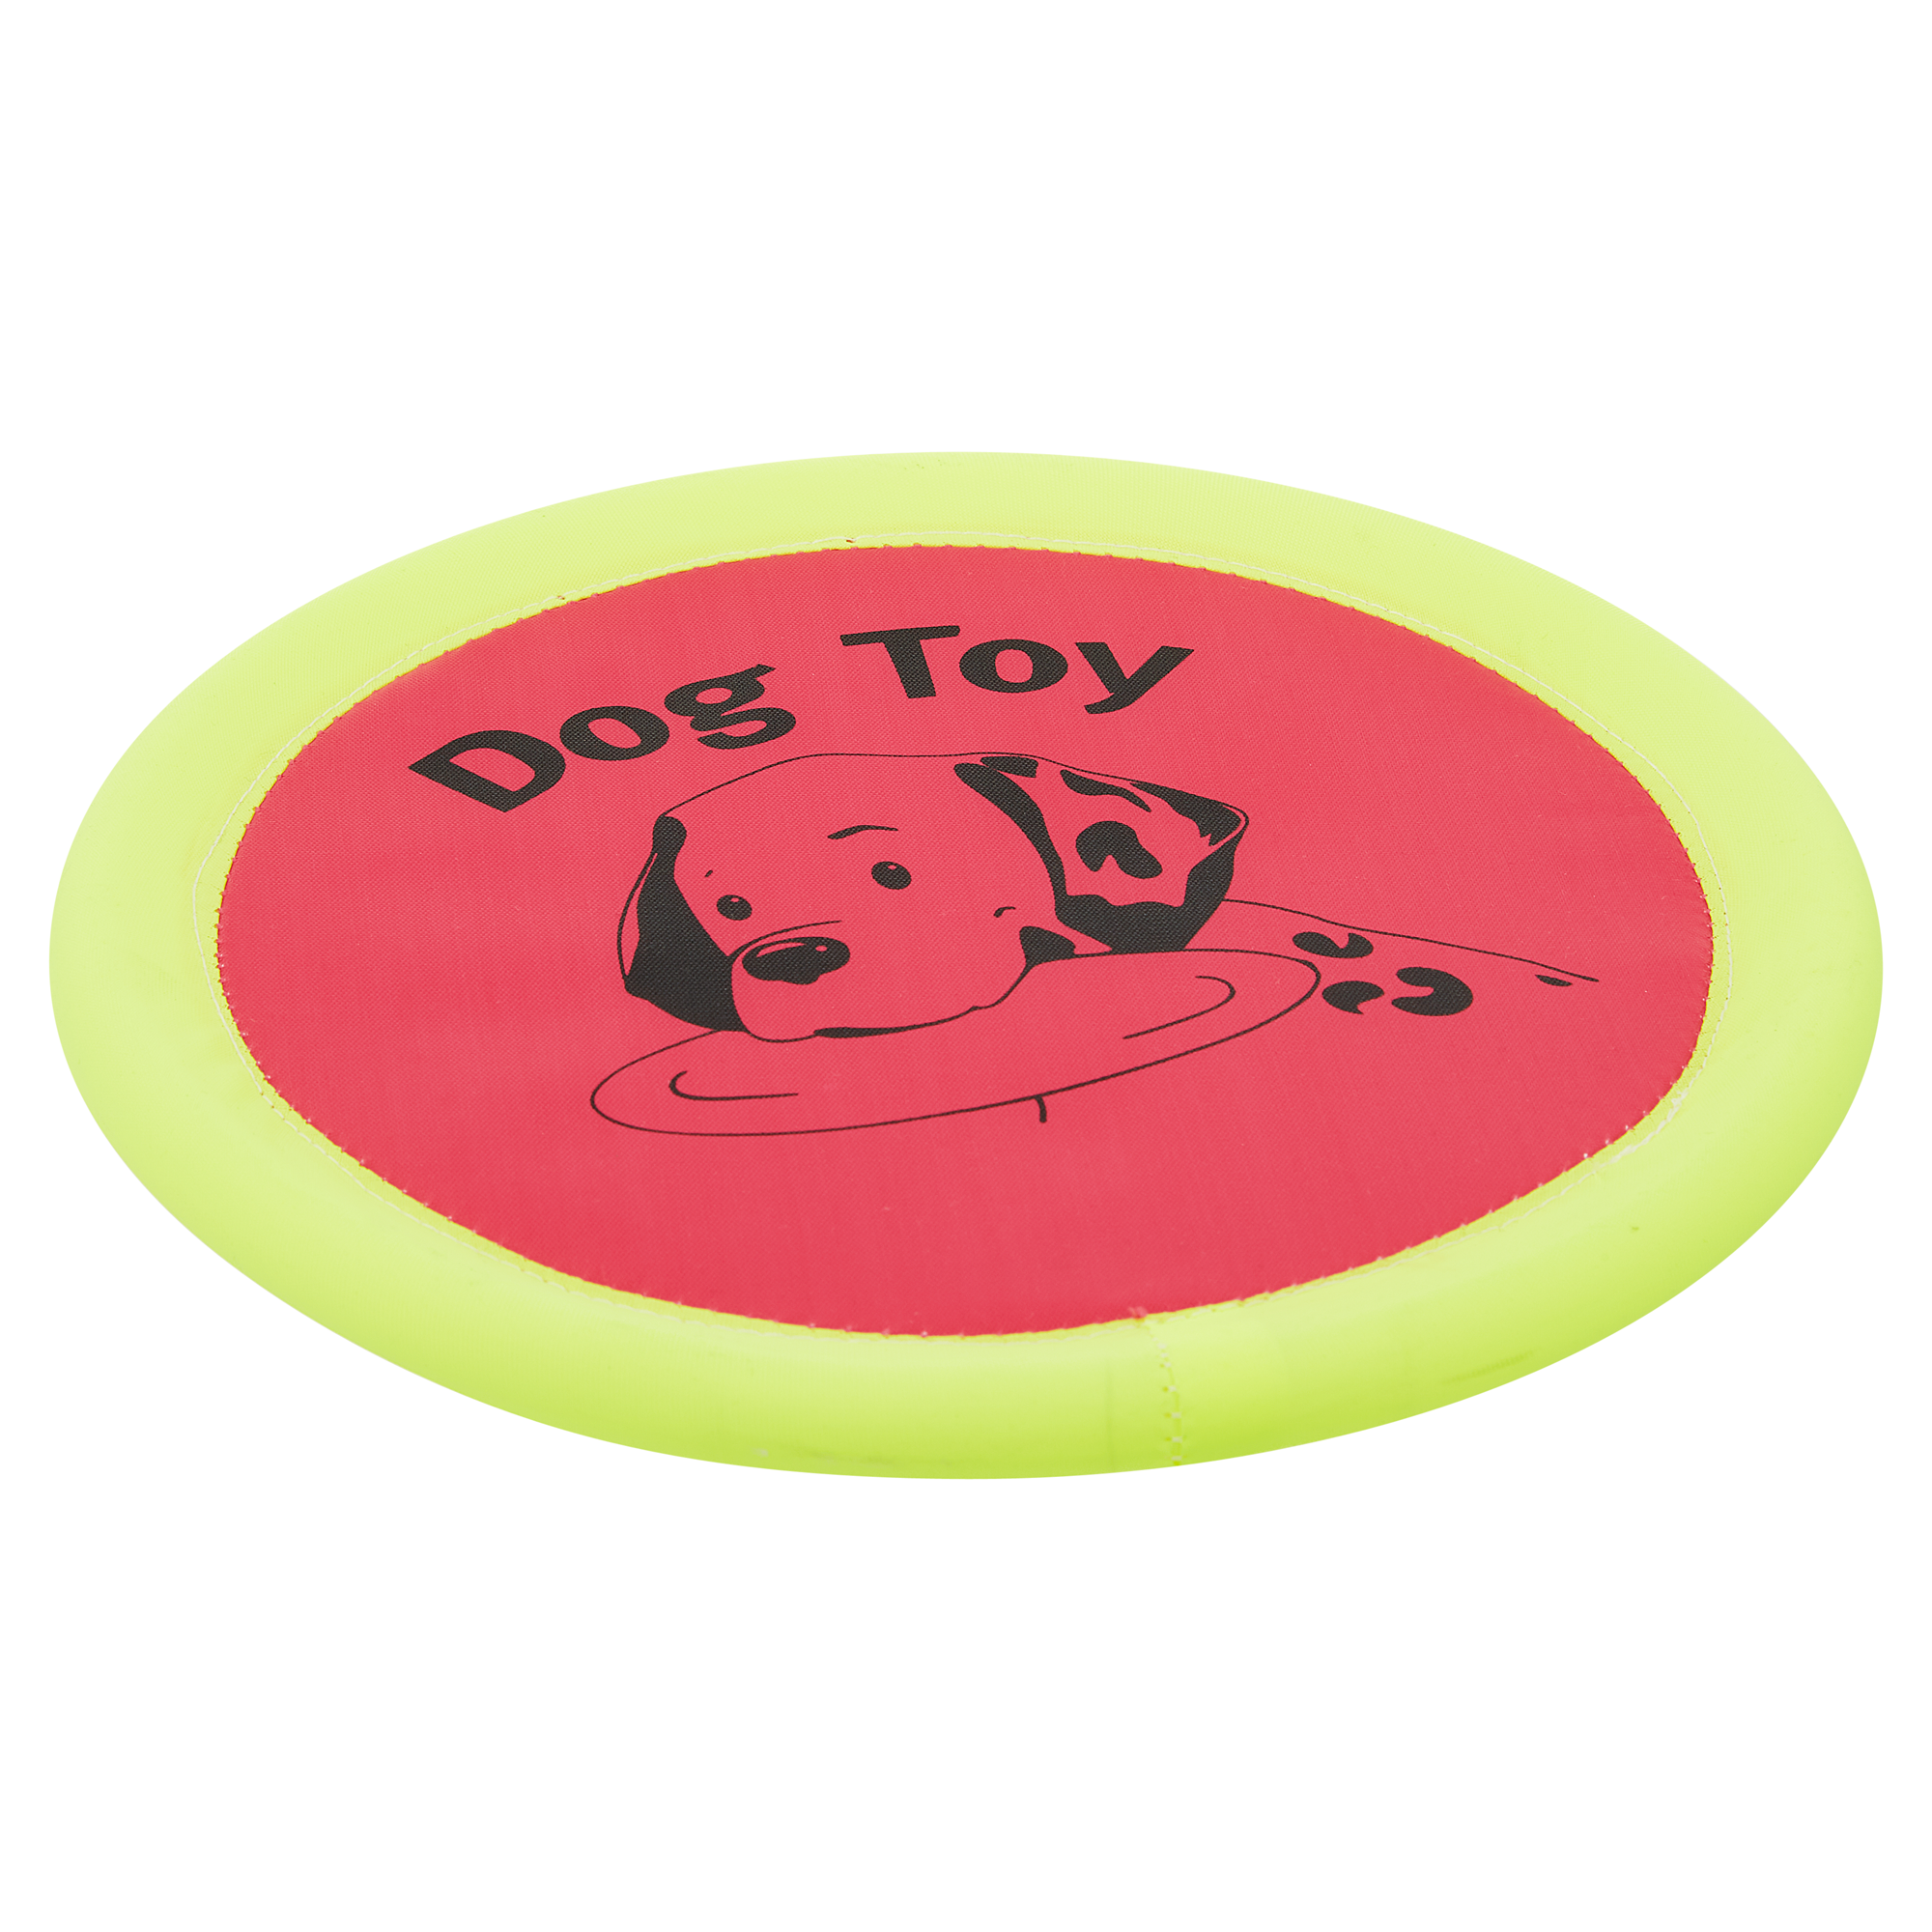 Hundespielzeug Frisbee Nylon pink/gelb Ø 24 cm + product picture